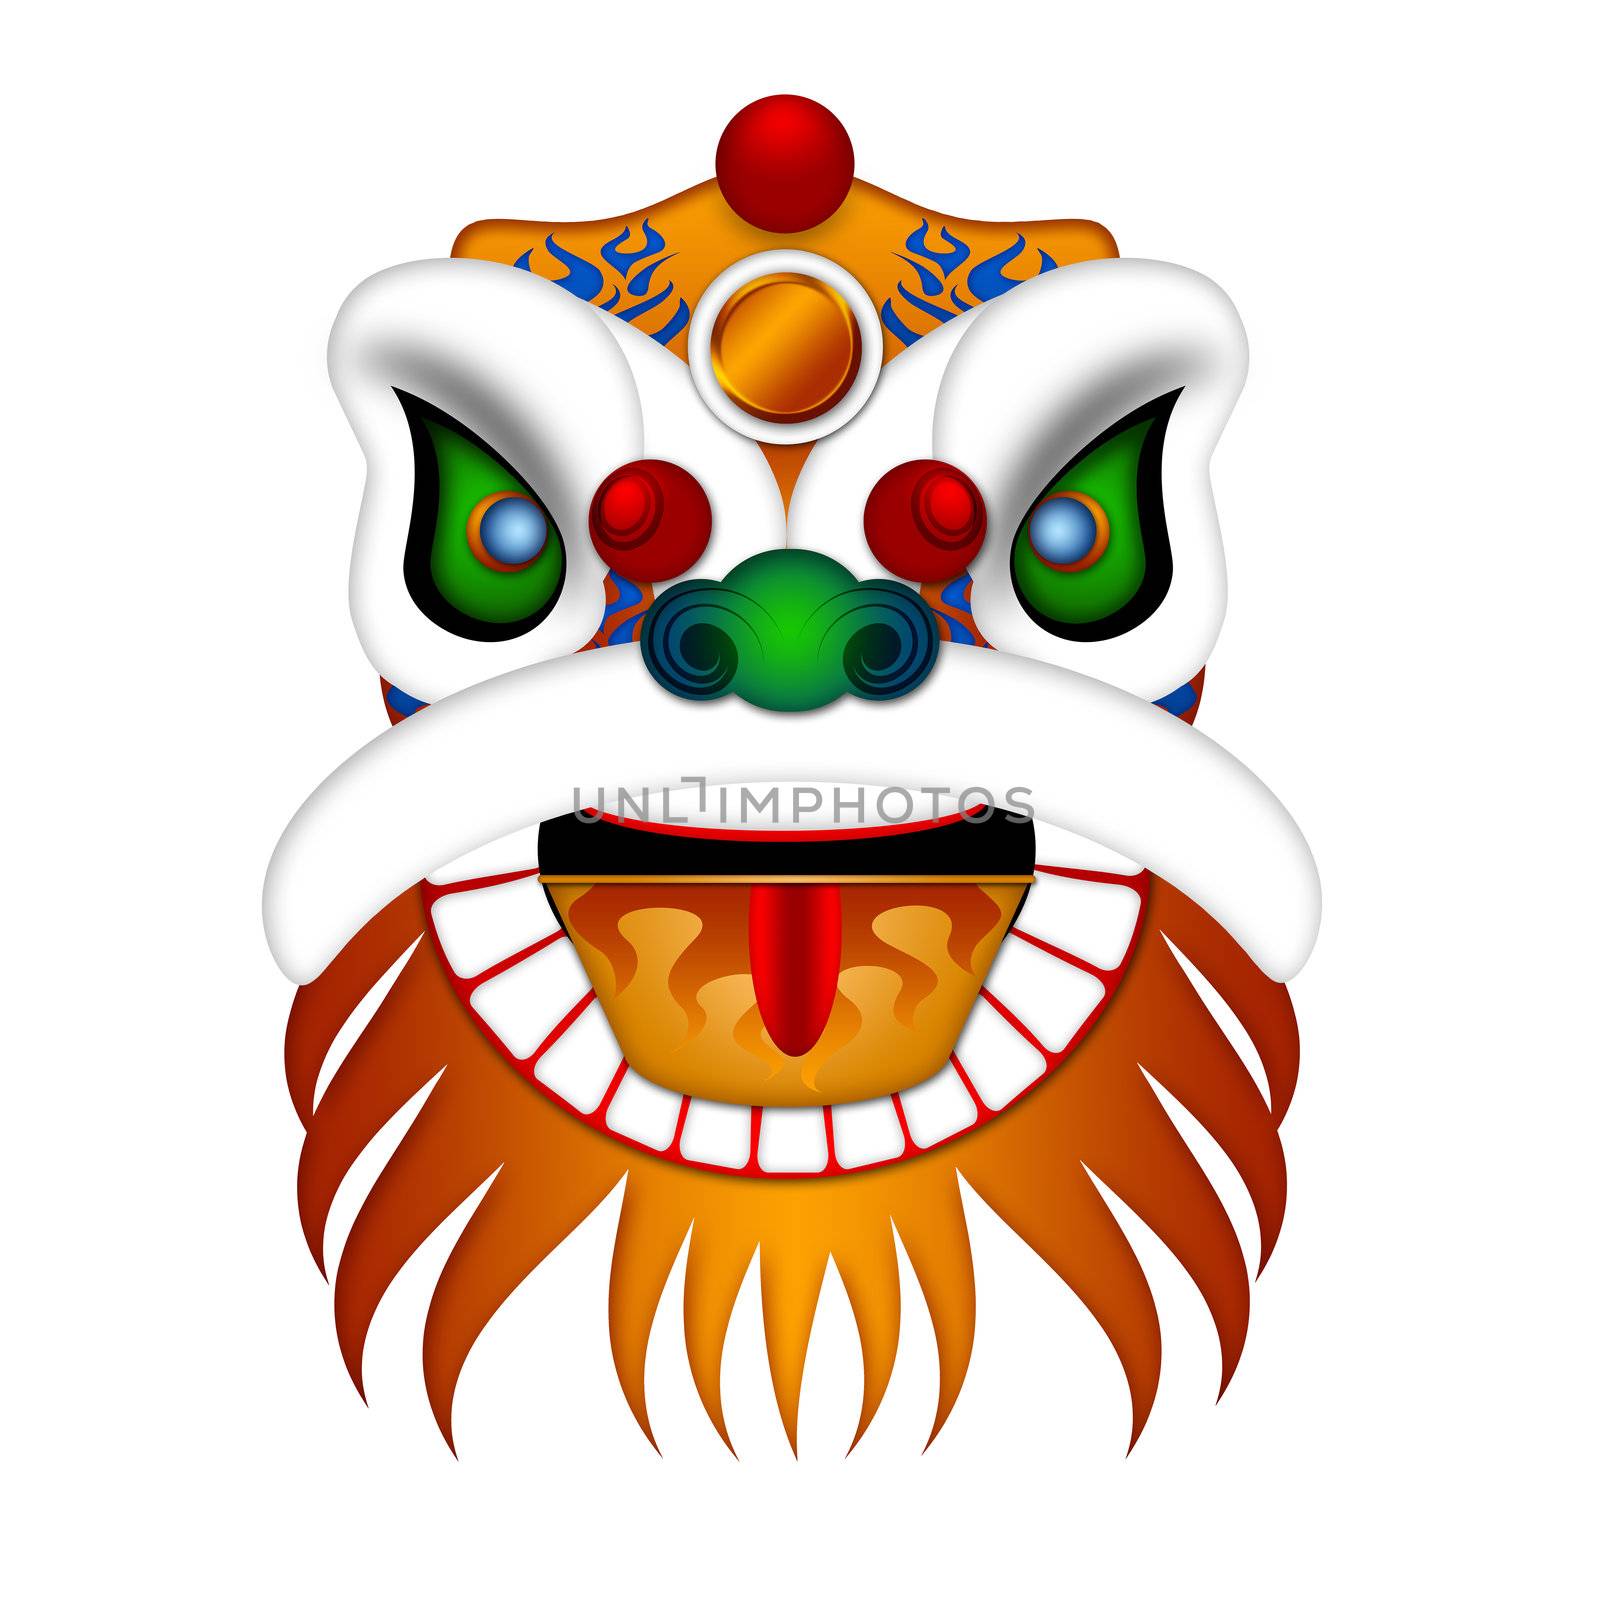 Chinese Lion Dance Colorful Ornate Head Illustration Isolated on White Background